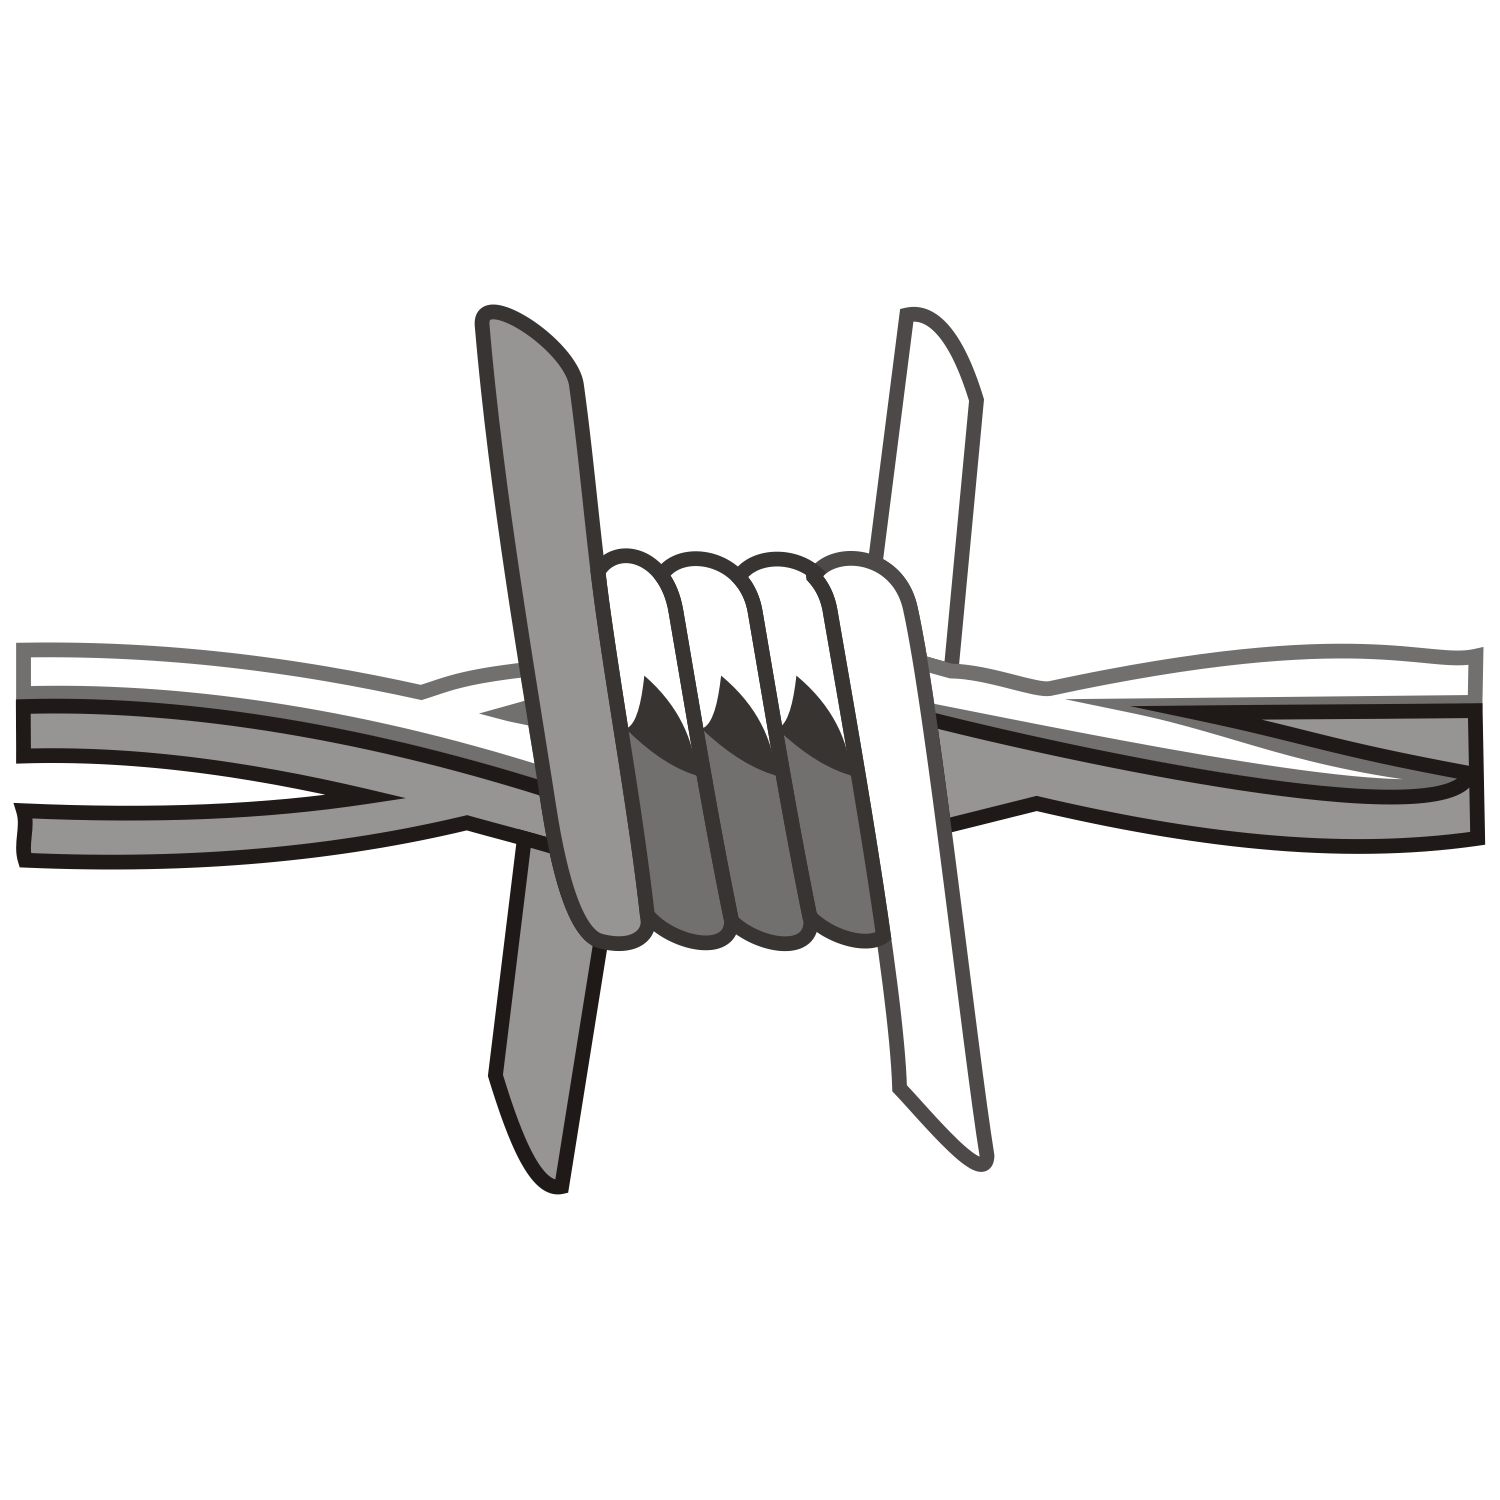 Barbed Wire Vector Free Download - ClipArt Best